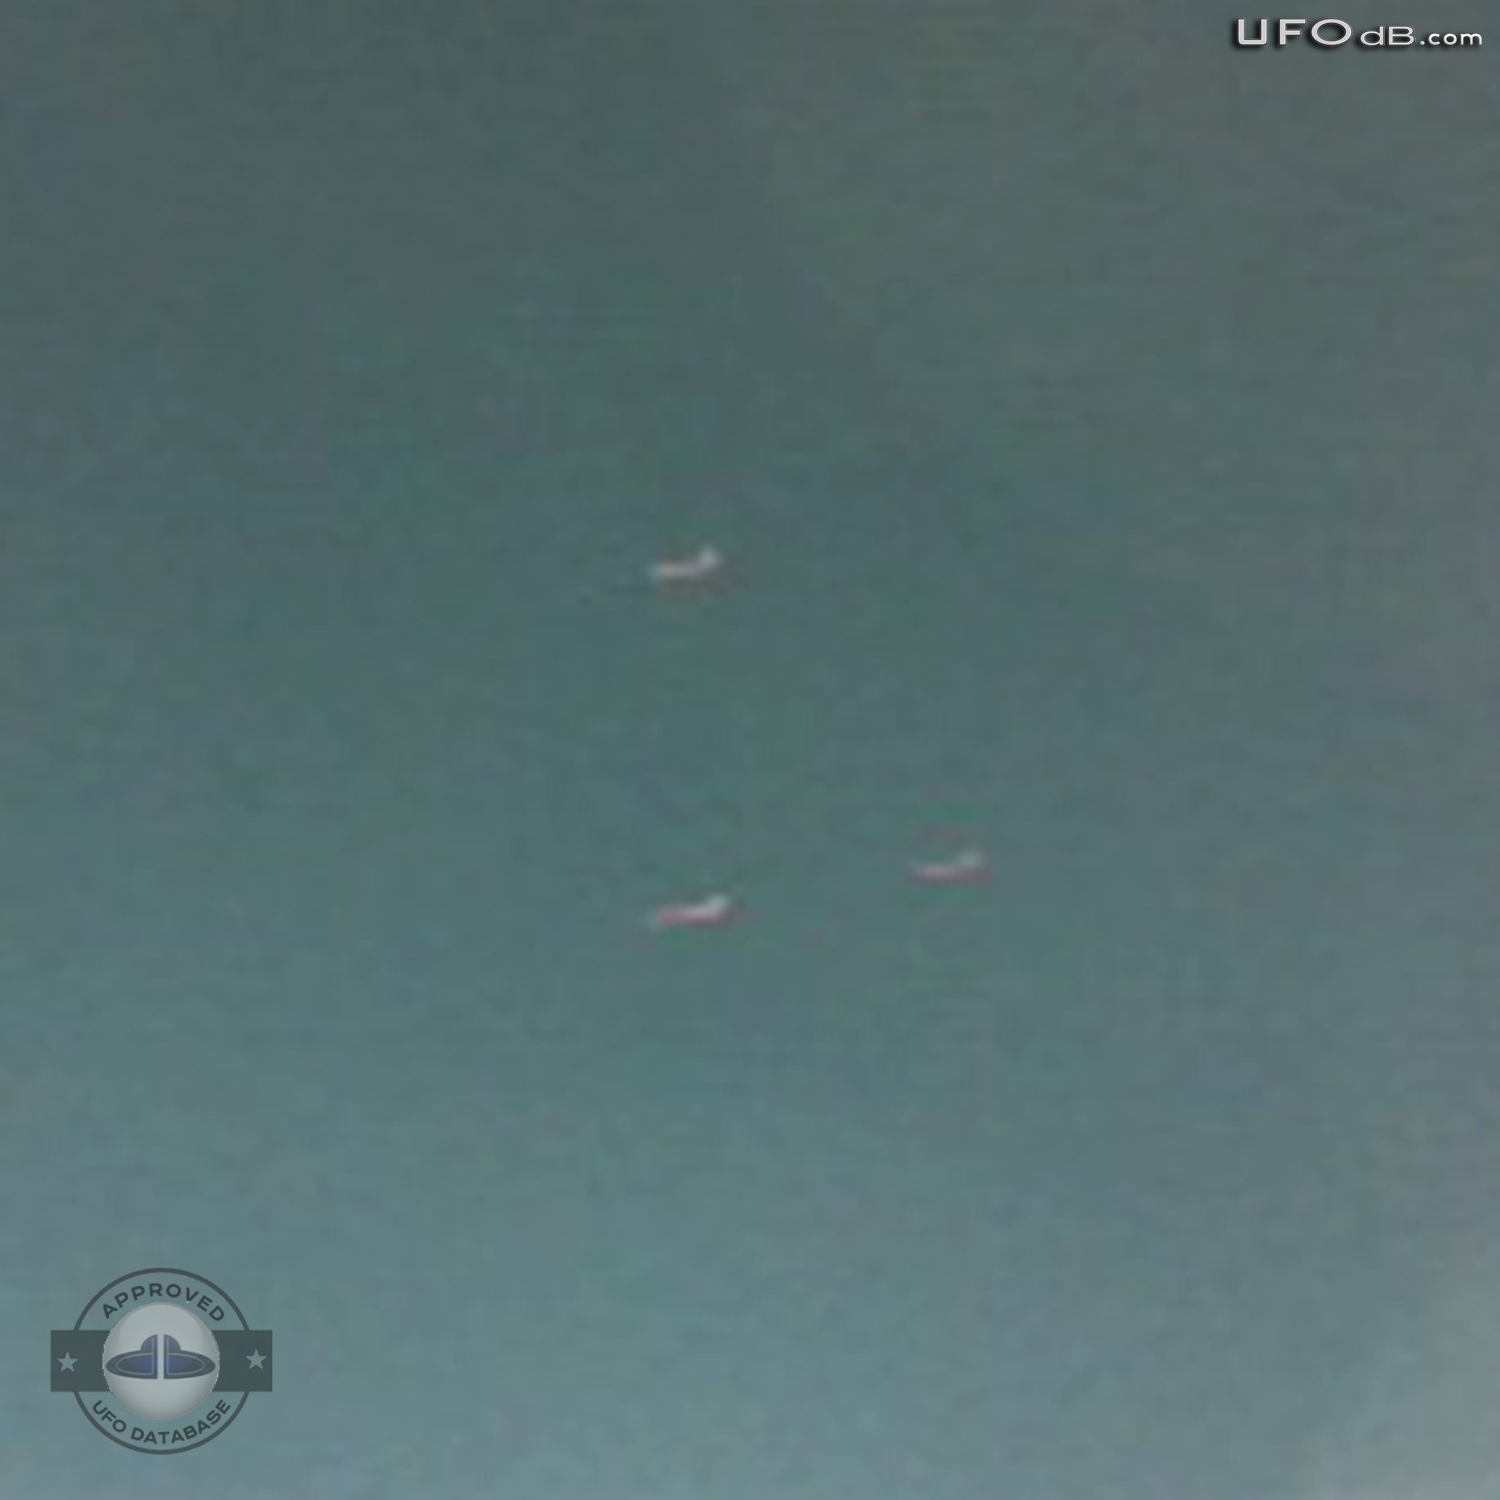 Lady Terrified by Huge UFO over her house | Illinois, USA | May 4 2011 UFO Picture #290-3